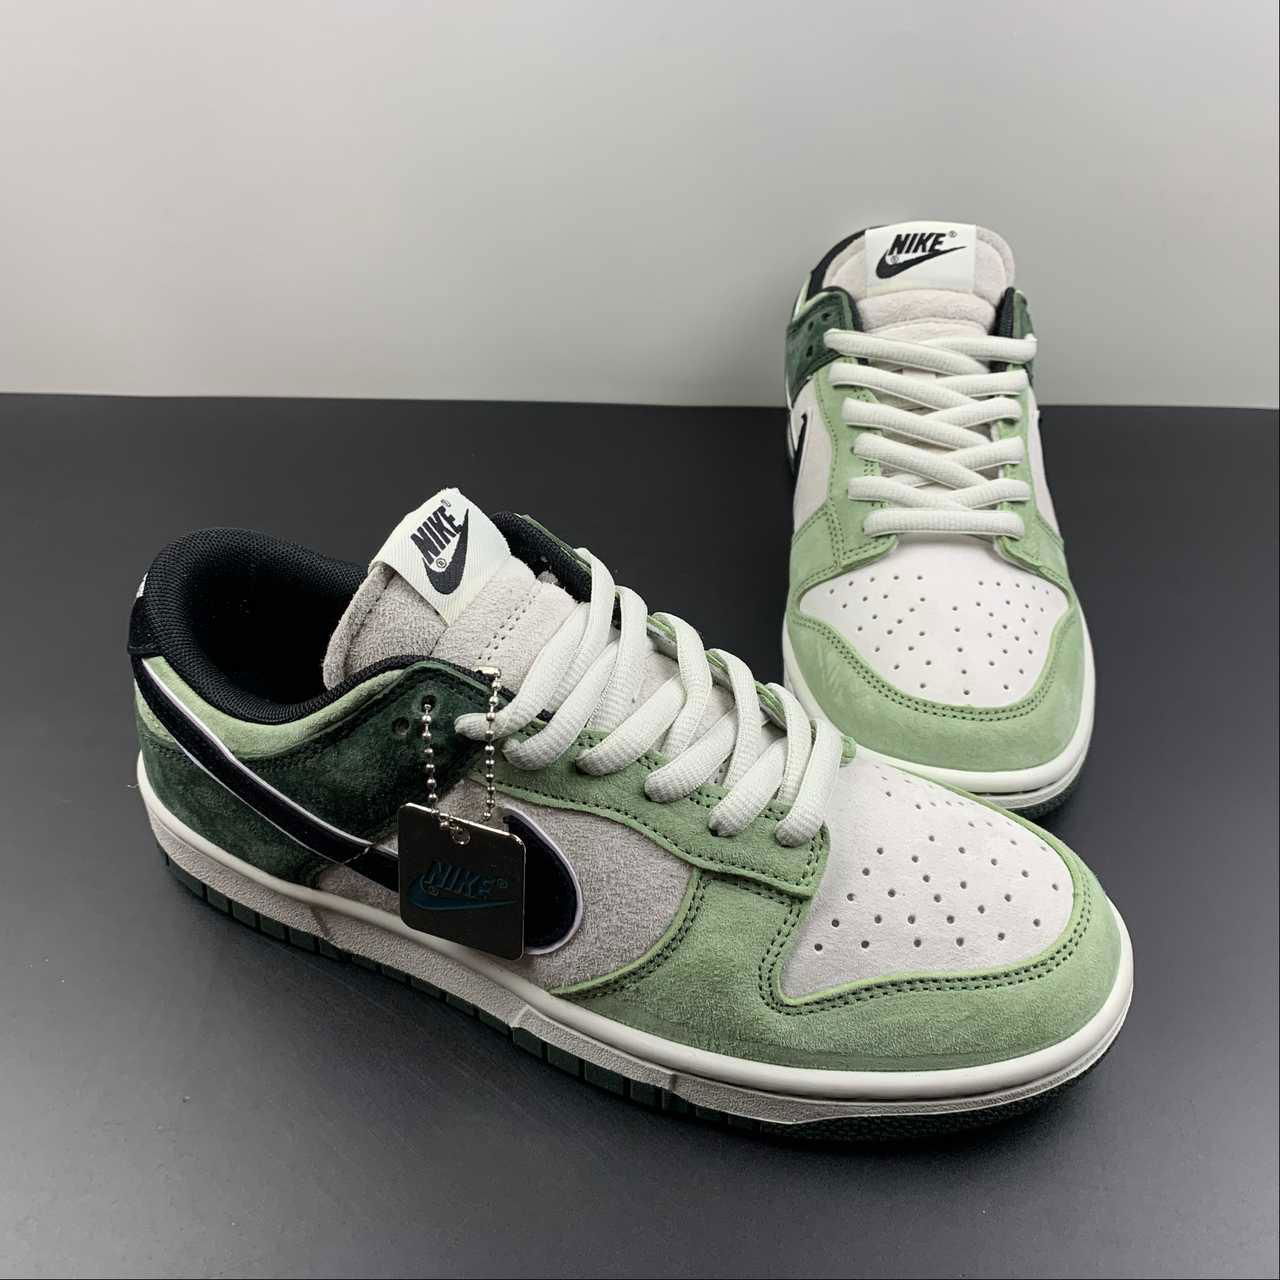      SB Dunk Low Top casual board shoes LF0068-001